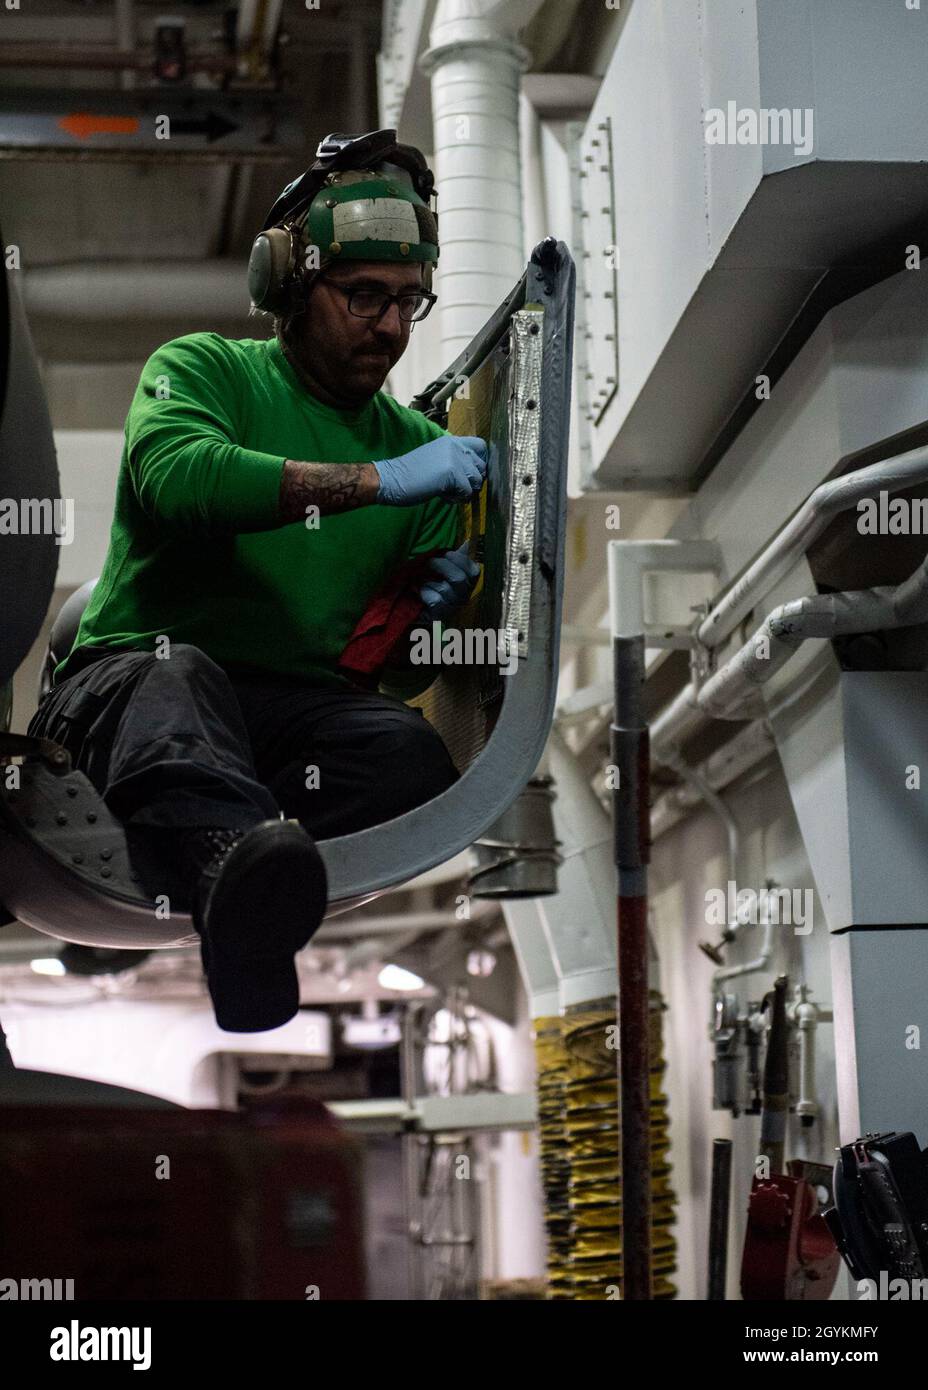 PACIFIC OCEAN (Jan. 21, 2020) Aviation Machinist’s Mate 2nd Class Jacob Burkindine, from Fresno, Calif., removes corrosion from the engine bay cowling on an MH-60R Sea Hawk, assigned to the “Scorpions” of Helicopter Maritime Strike Squadron (HSM) 49, in the hangar bay aboard the Arleigh Burke-class guided-missile destroyer USS Rafael Peralta (DDG 115) Jan. 21, 2020. Rafael Peralta, part of the Theodore Roosevelt Carrier Strike Group, is on a scheduled deployment to the Indo-Pacific. (U.S. Navy photo by Mass Communication Specialist 2nd Class Jason Isaacs) Stock Photo